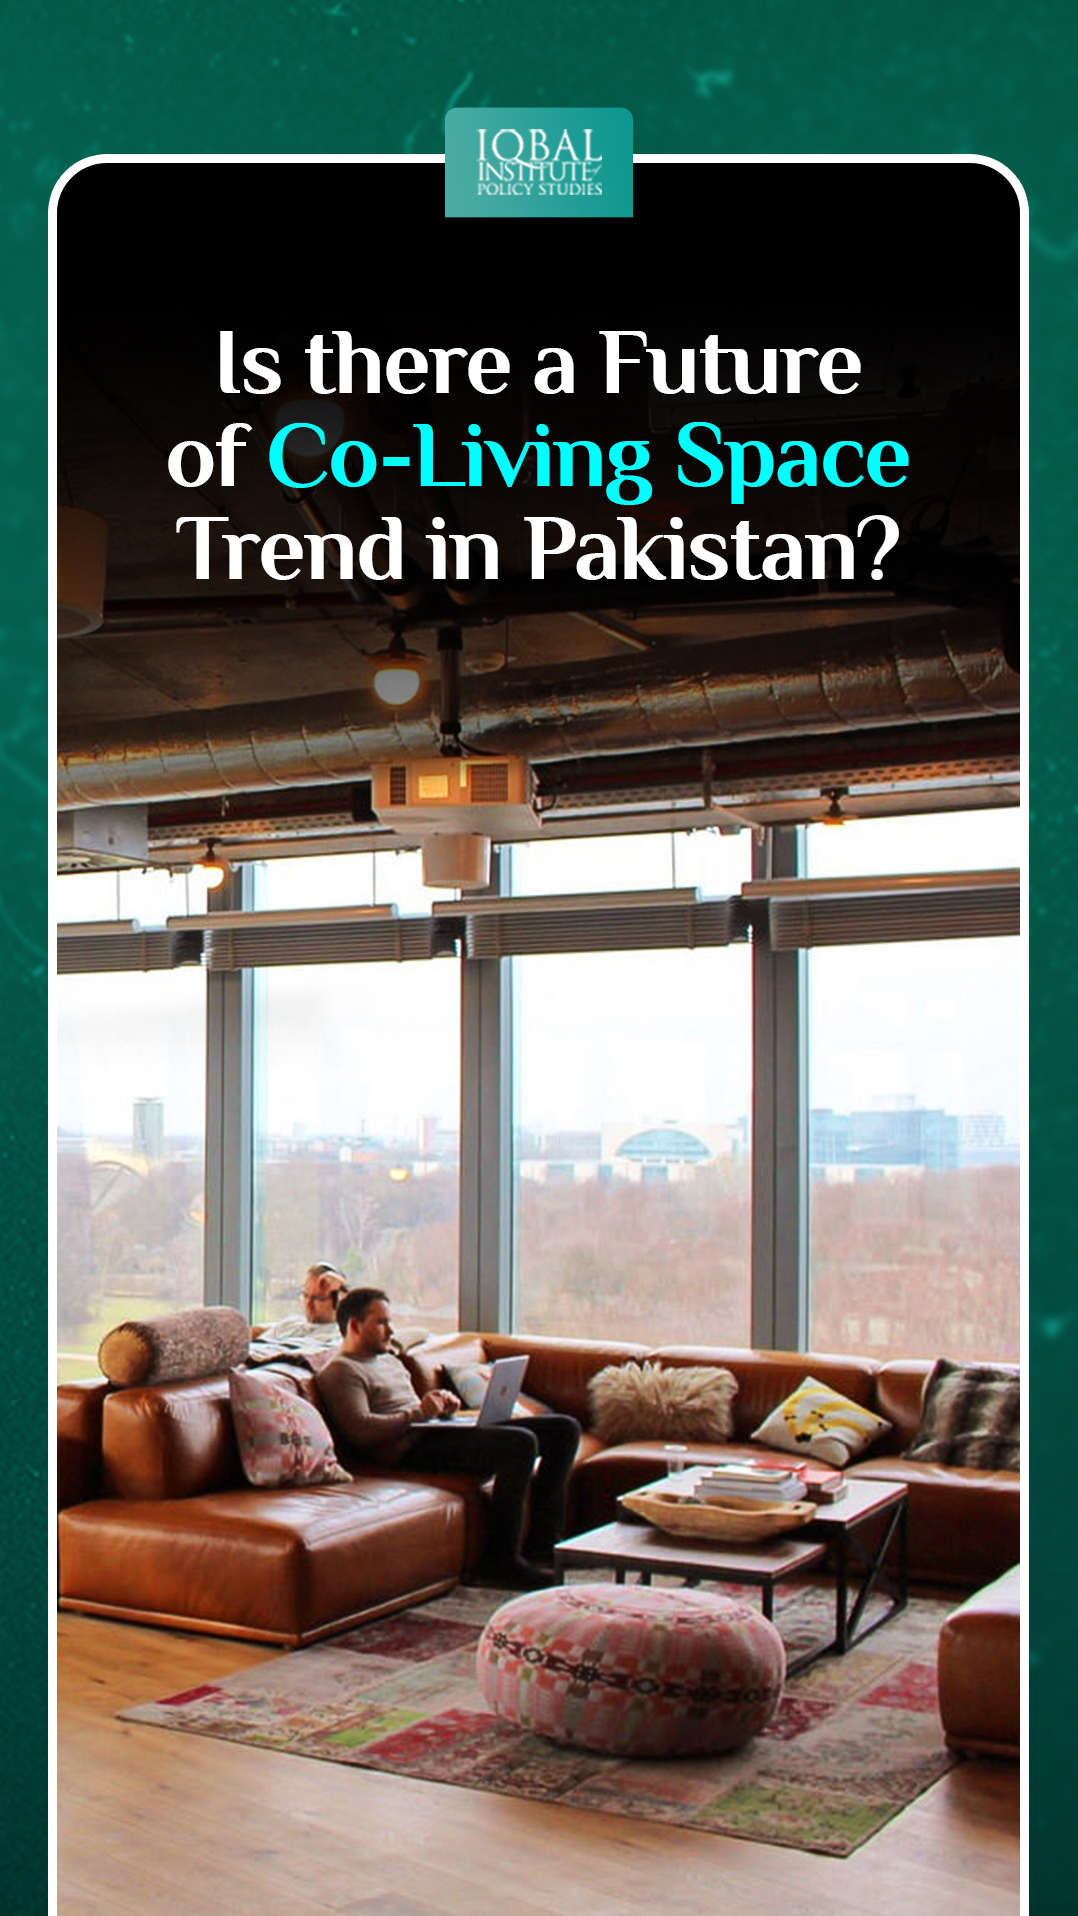 Is there a Future of Co-Living Space Trend in Pakistan?